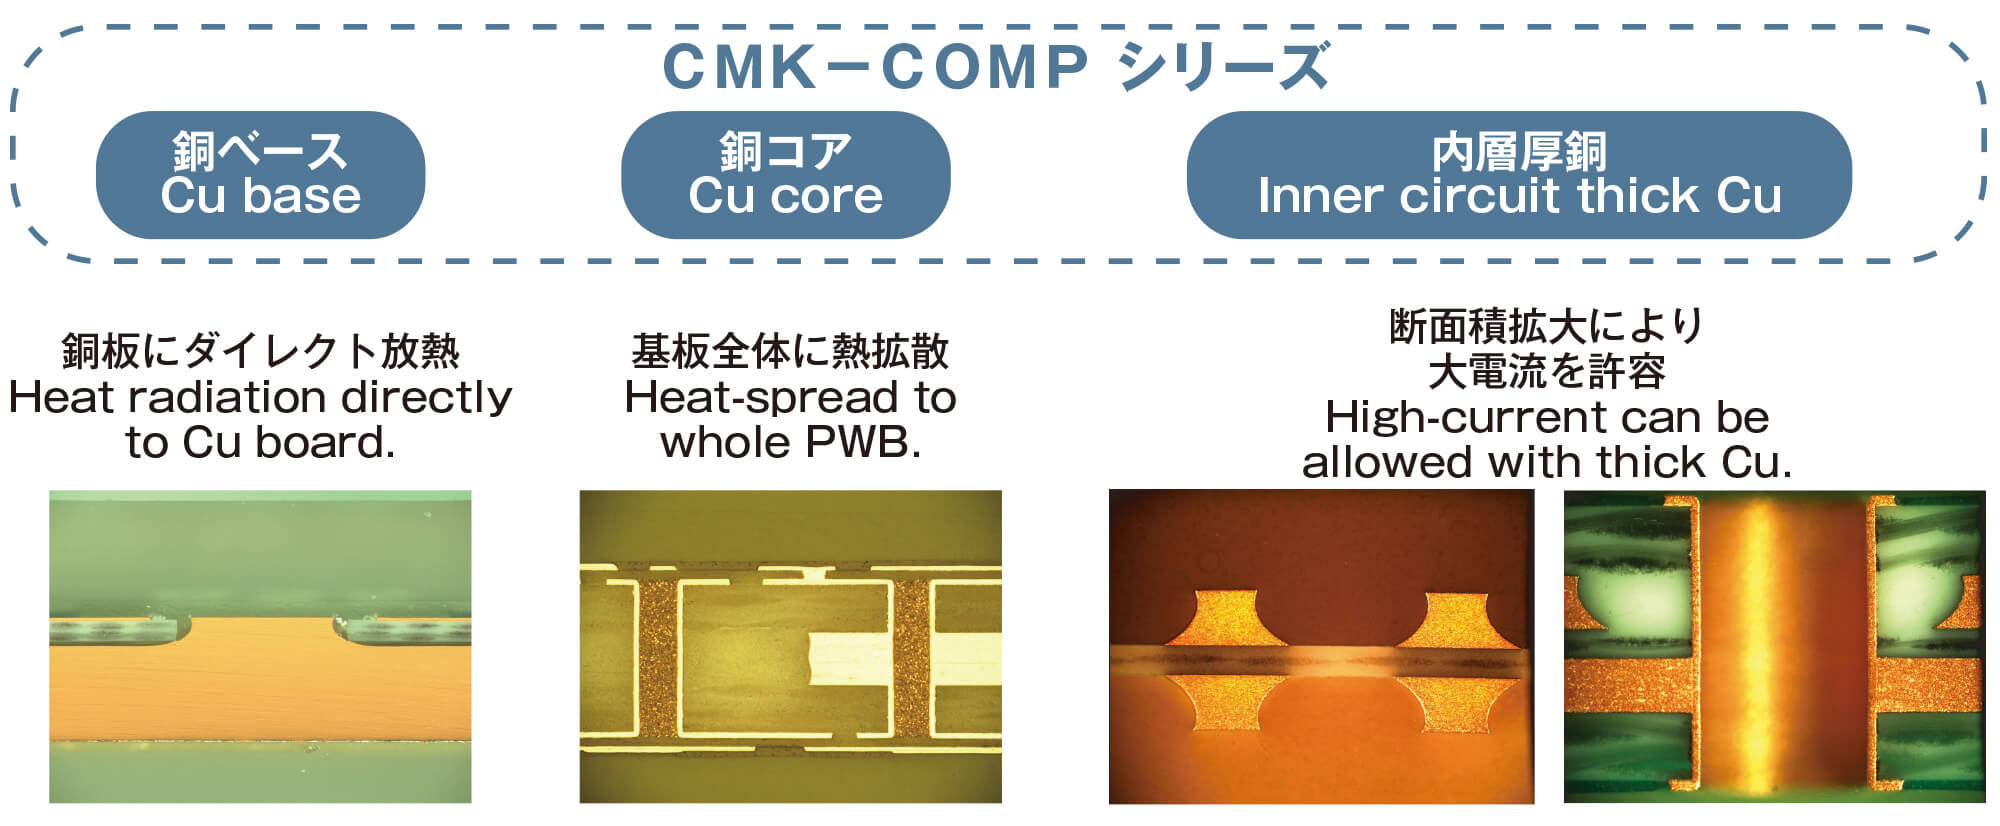 CMK-COMP series. Cu base(Heat radiation directly to Cu board.), Cu core(Heat-spread to whole PWB.), Inner circuit thick Cu(High-current can be allowed with thick Cu.)